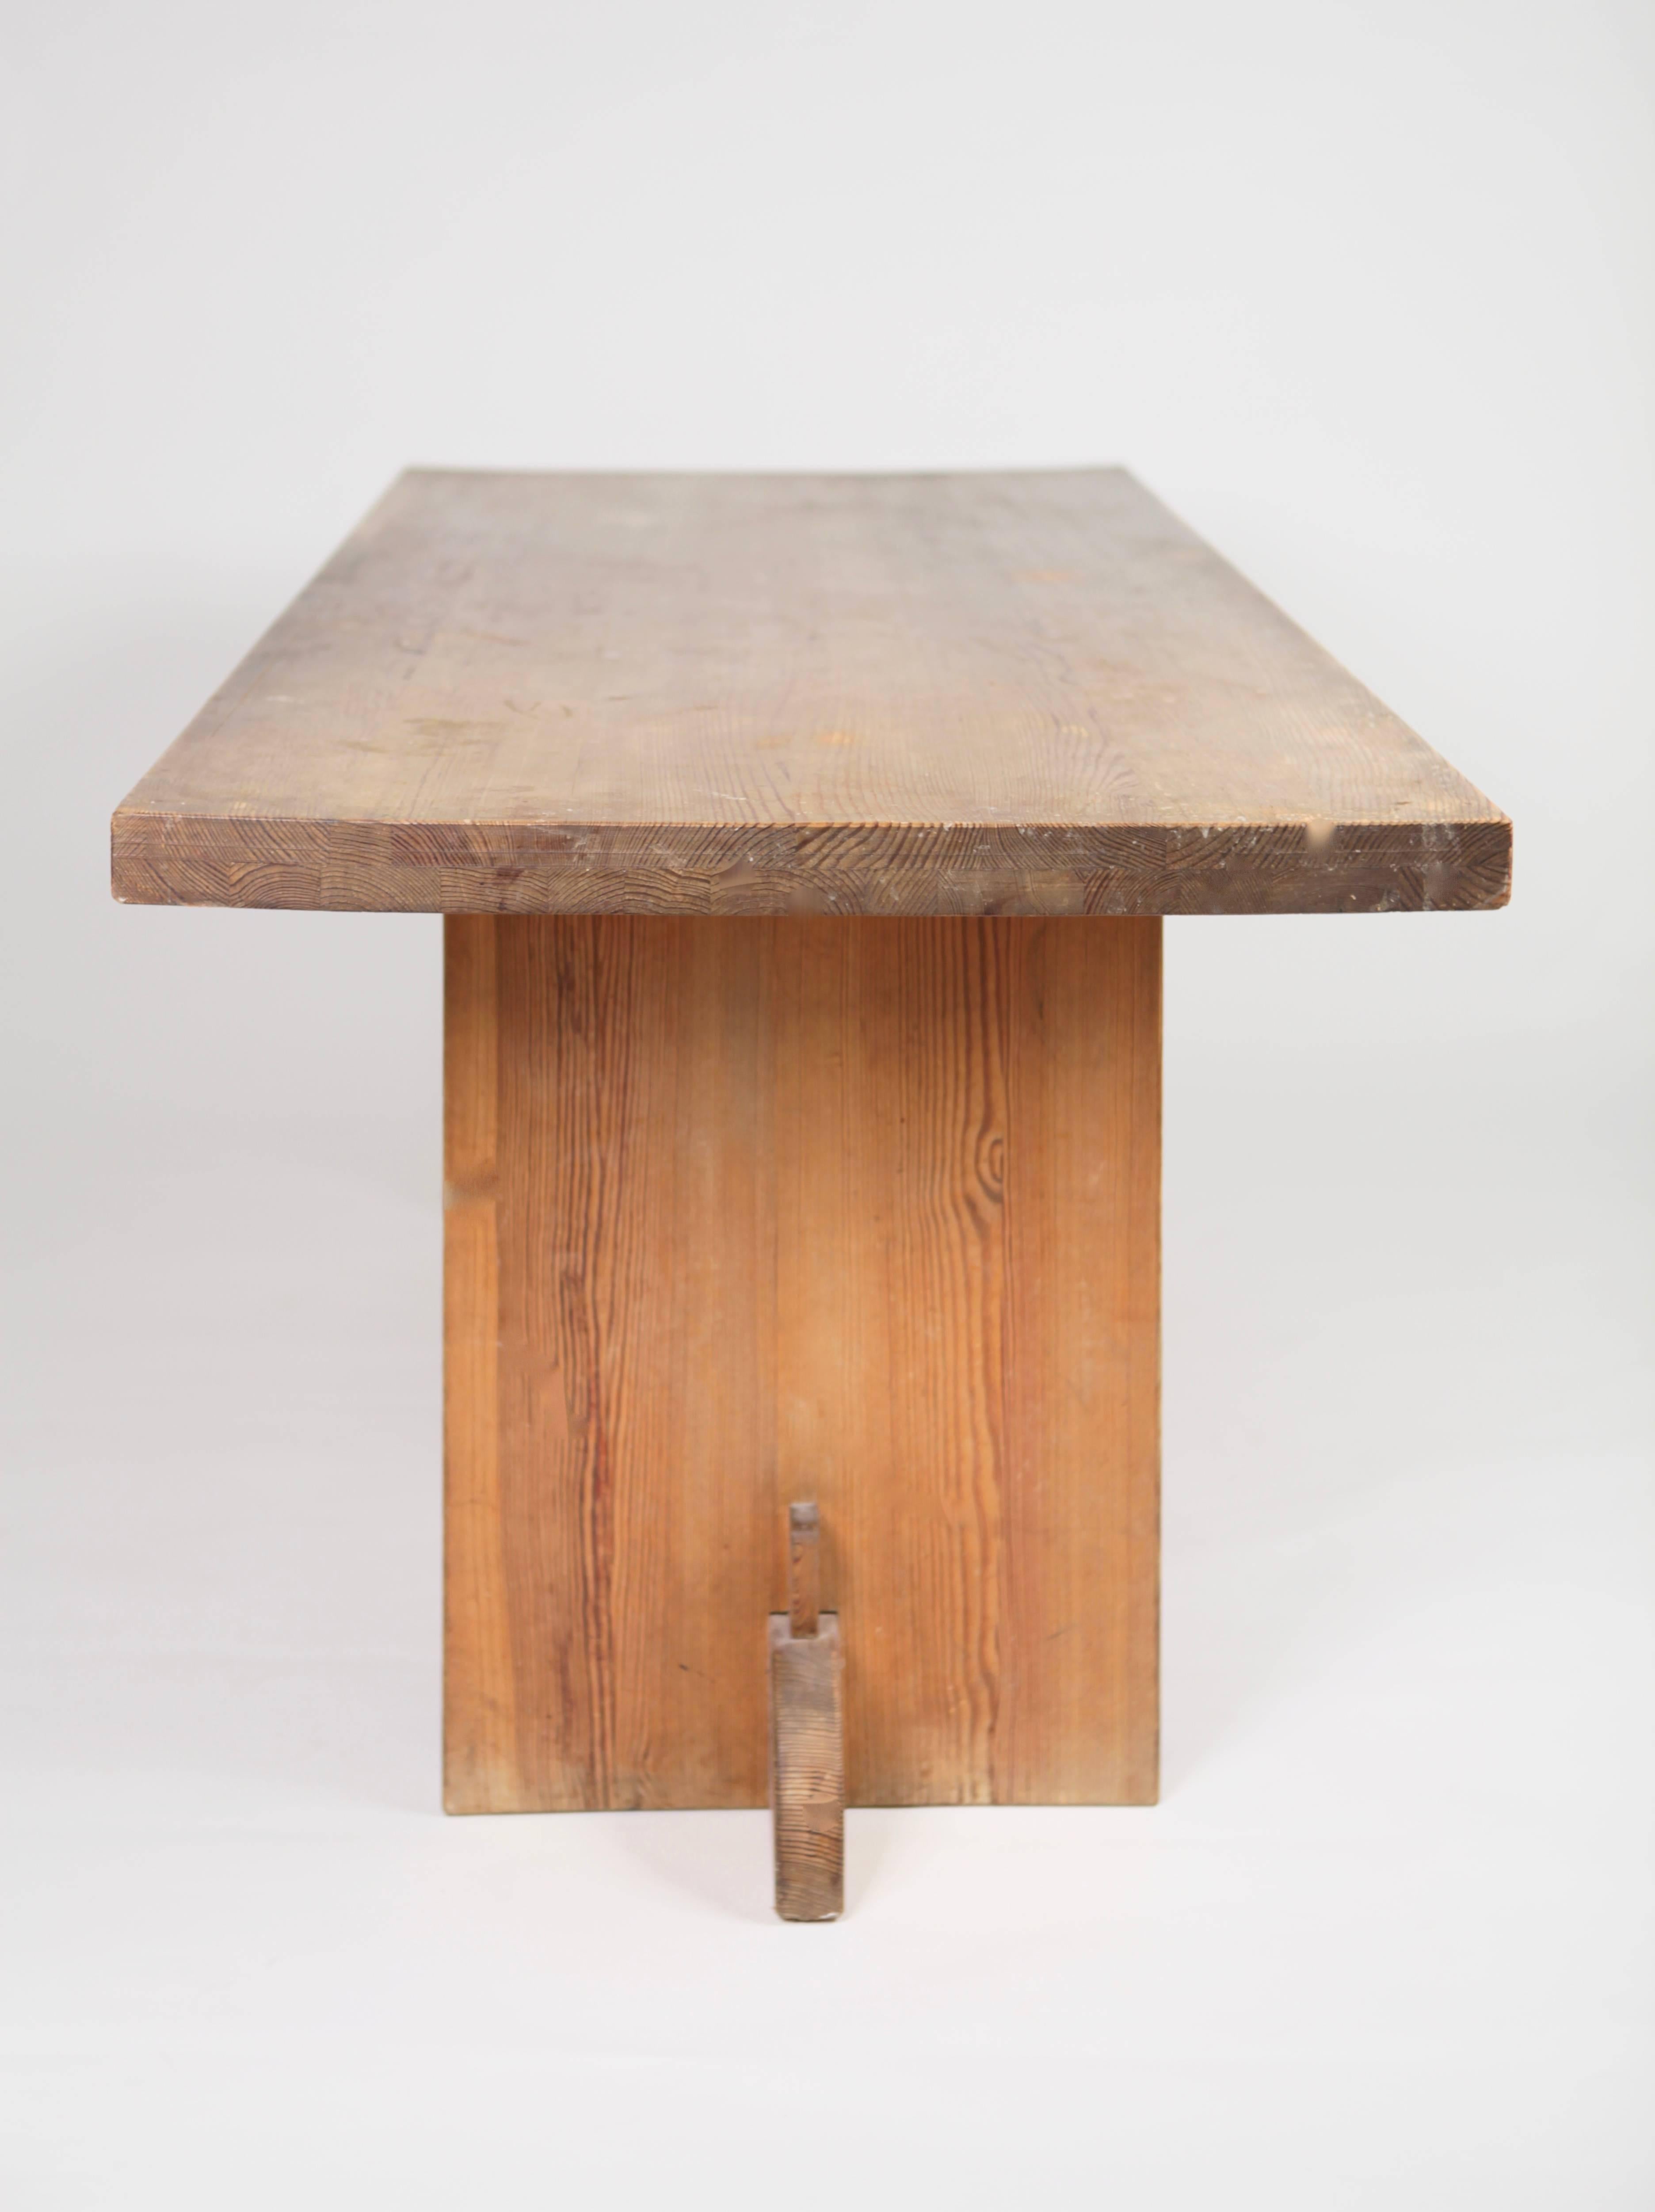 Pine 'Lovö' table by Swedish Modernist Axel-Einar Hjorth, manufactured by Nordiska Kompaniet in Sweden, circa 1932.
Best known for his modern reduced design, this table by Axel-Einar Hjorth is one of his masterpieces.